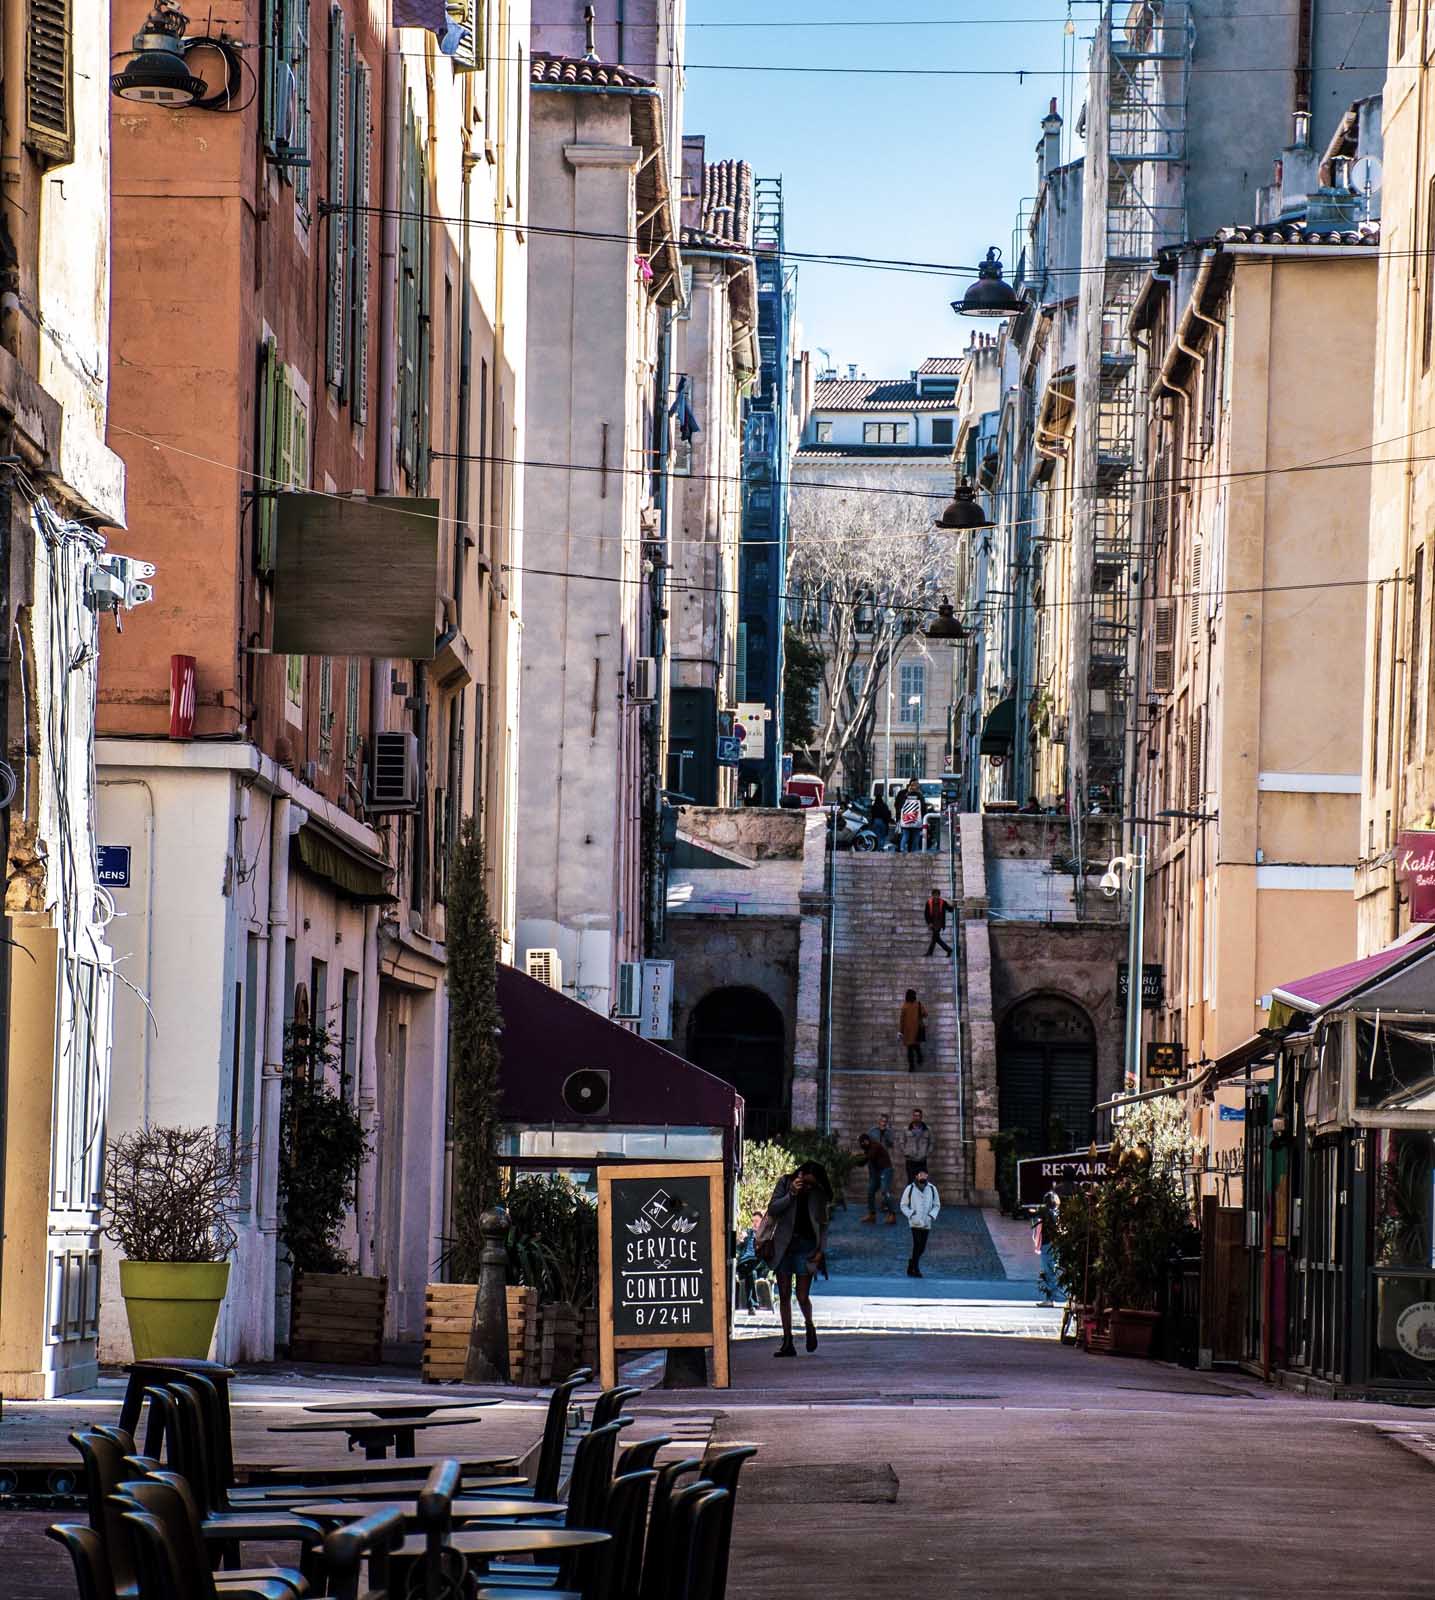 Walk the streets of Le Panier in Marseille France